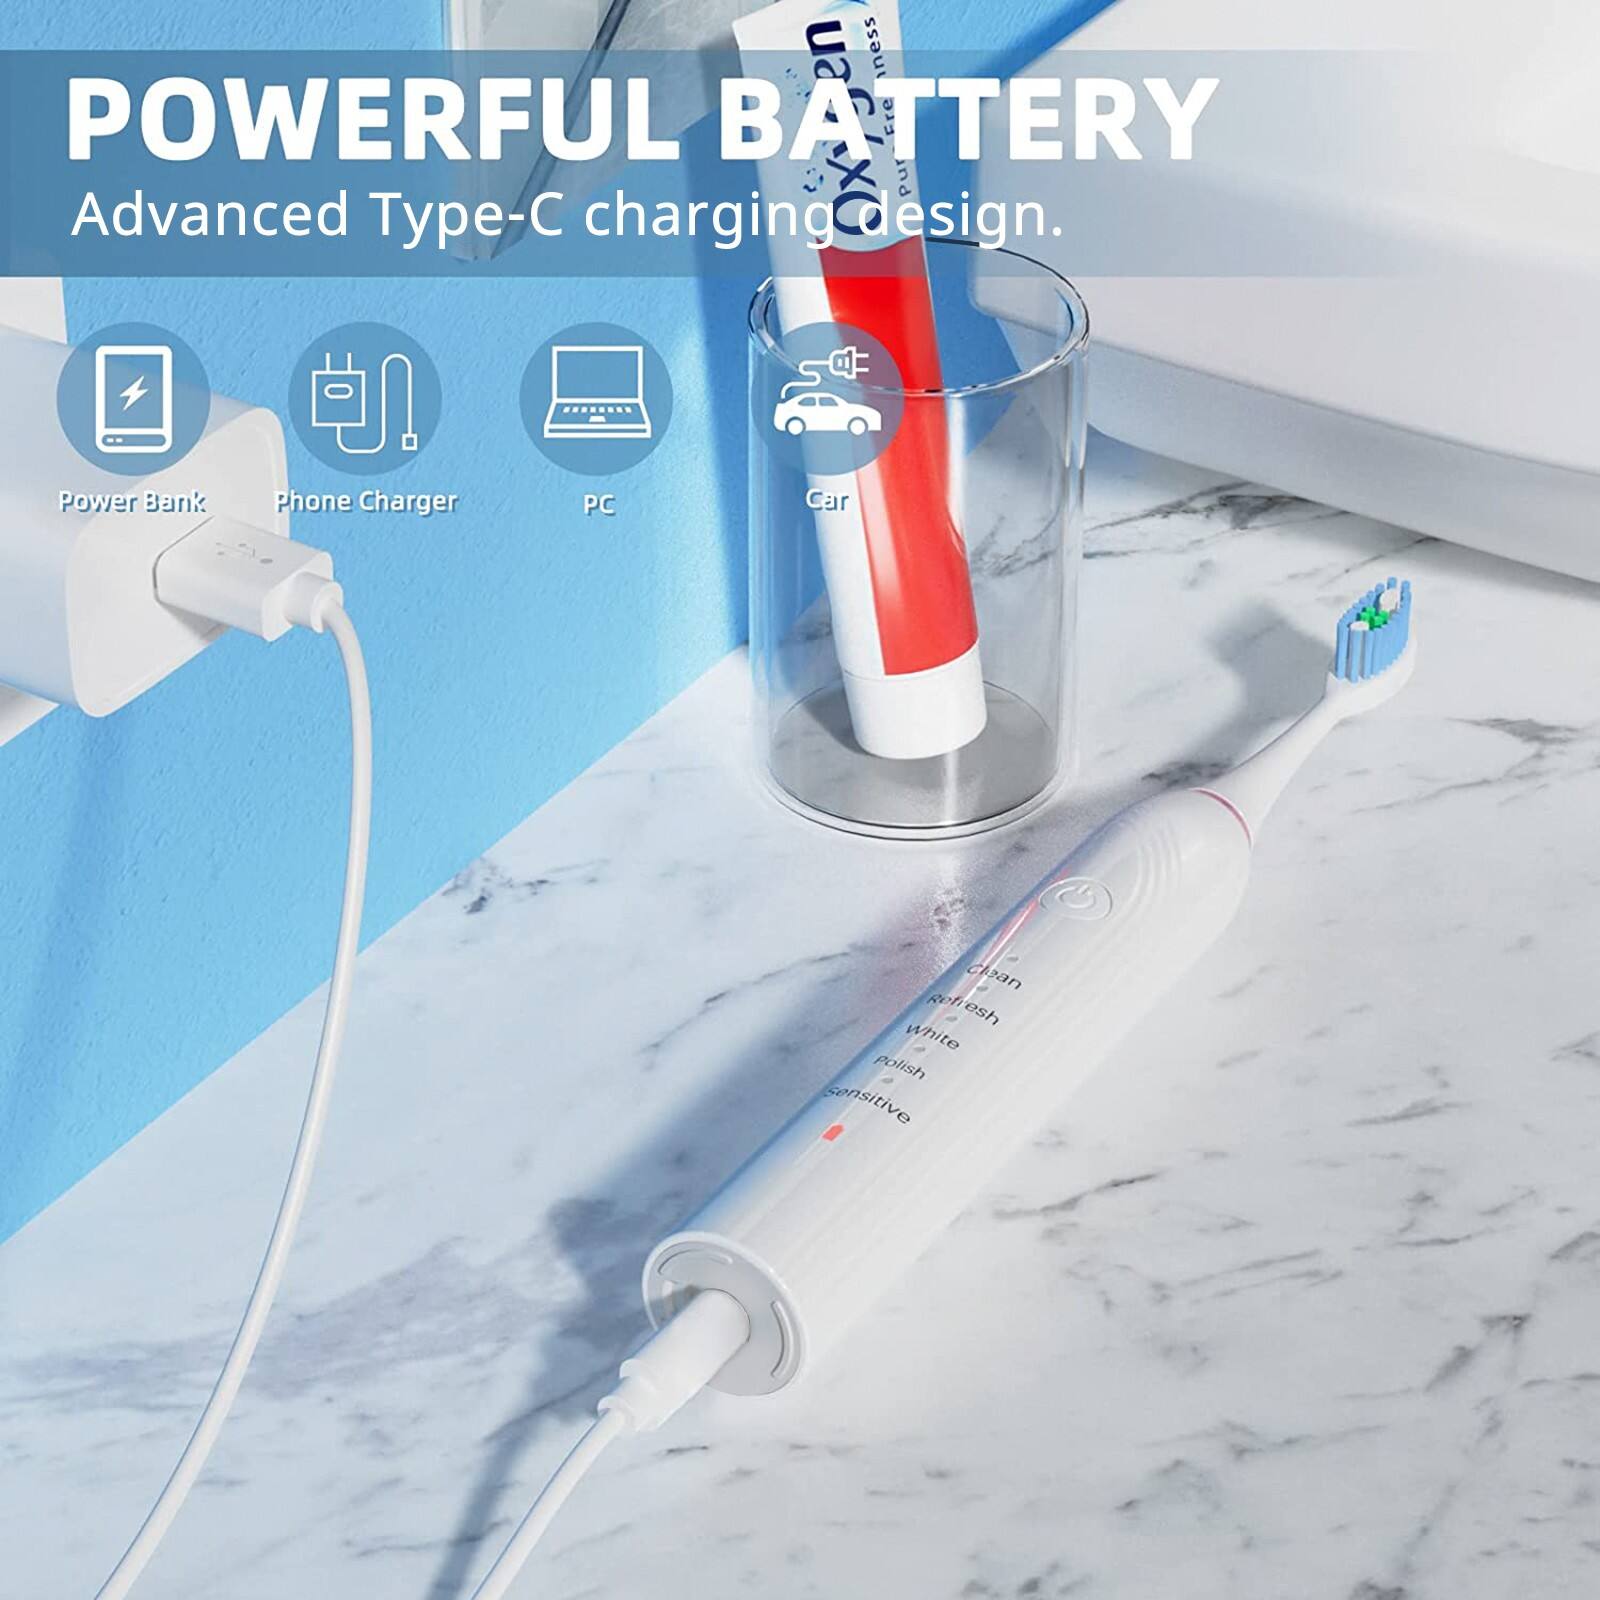 Electric Toothbrush M3 details